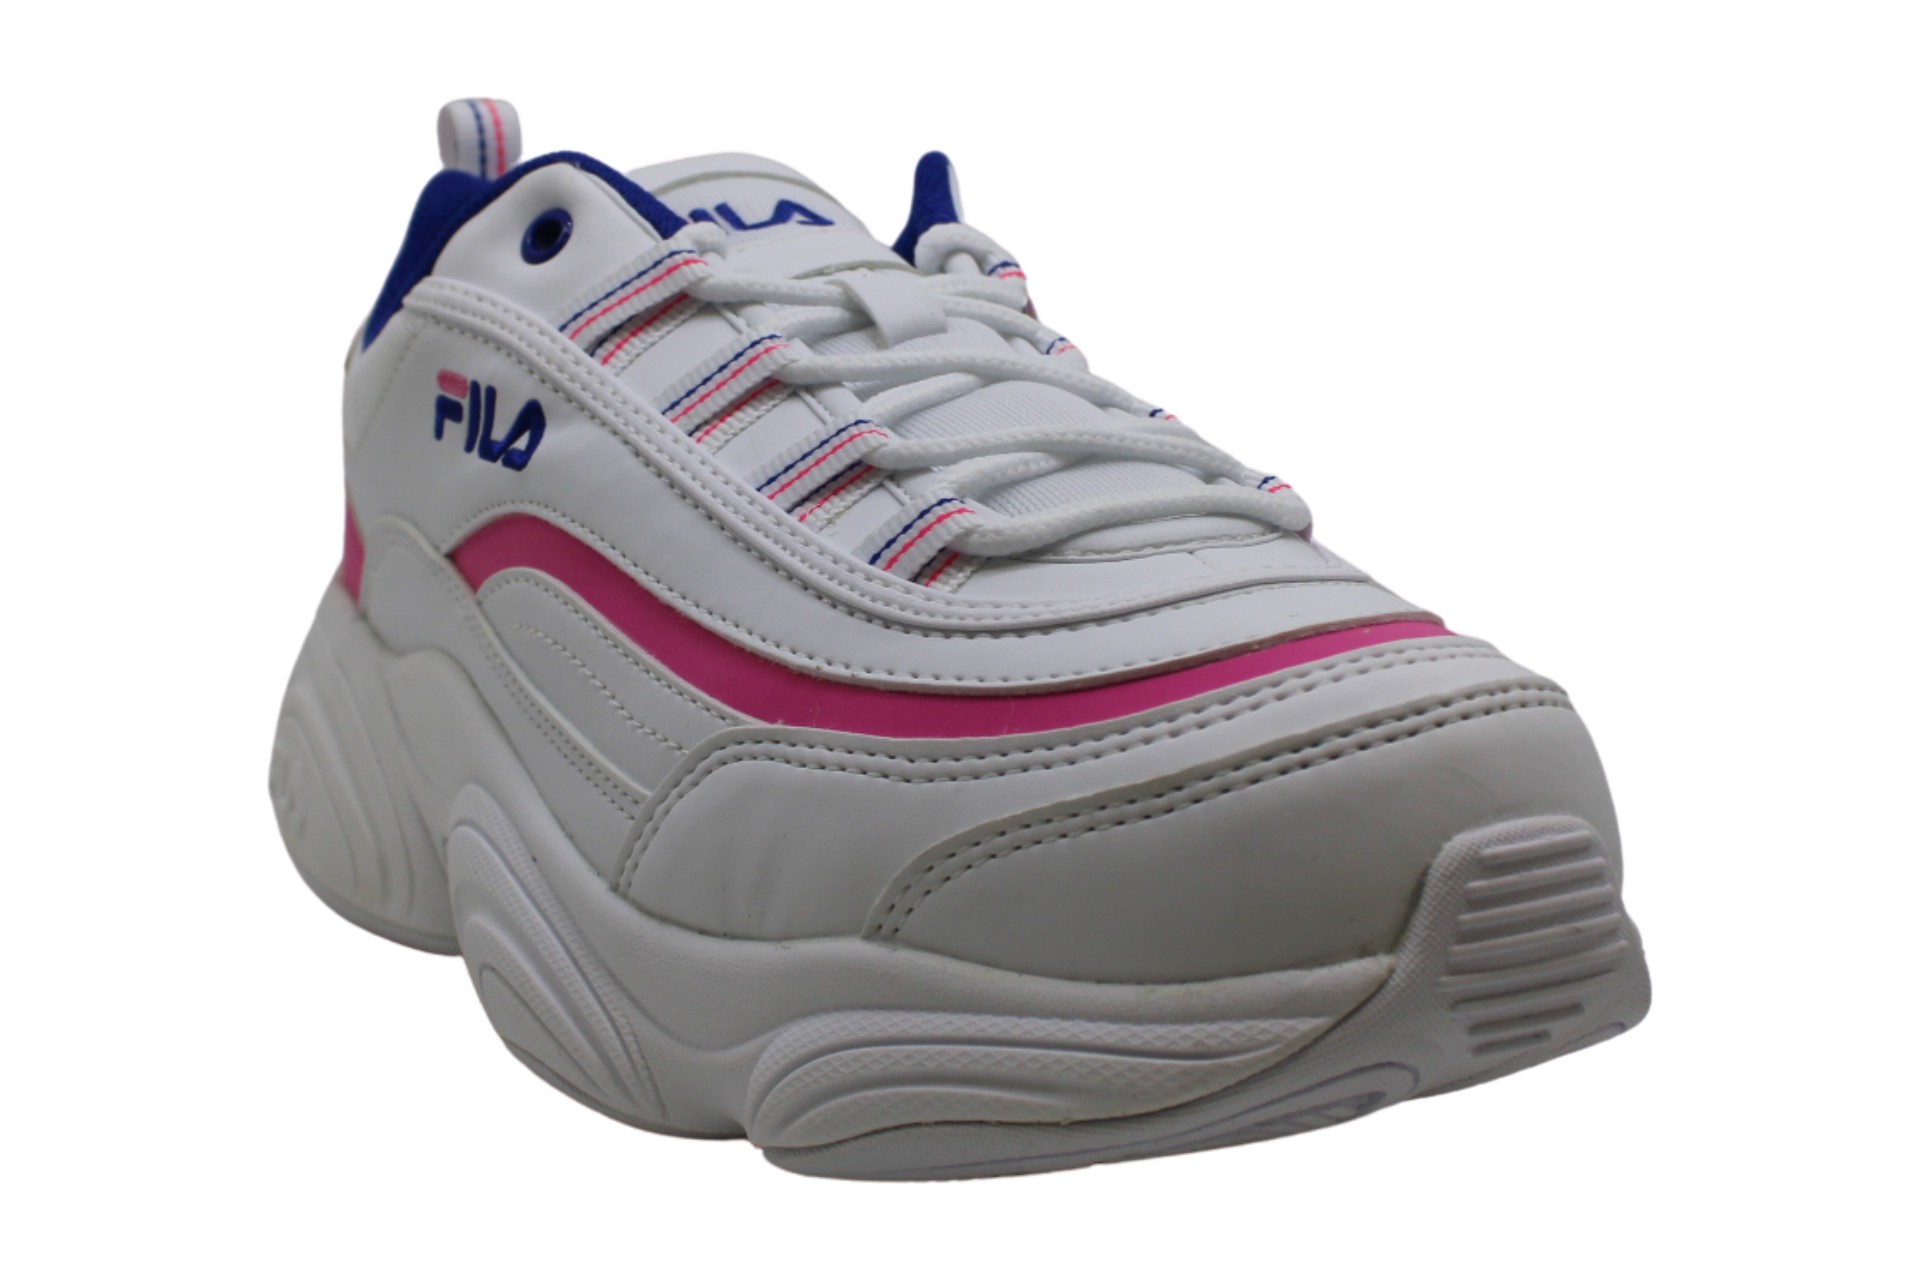 Fila Womens Fashion Sneakers in White Color, Size 9 MIF | eBay